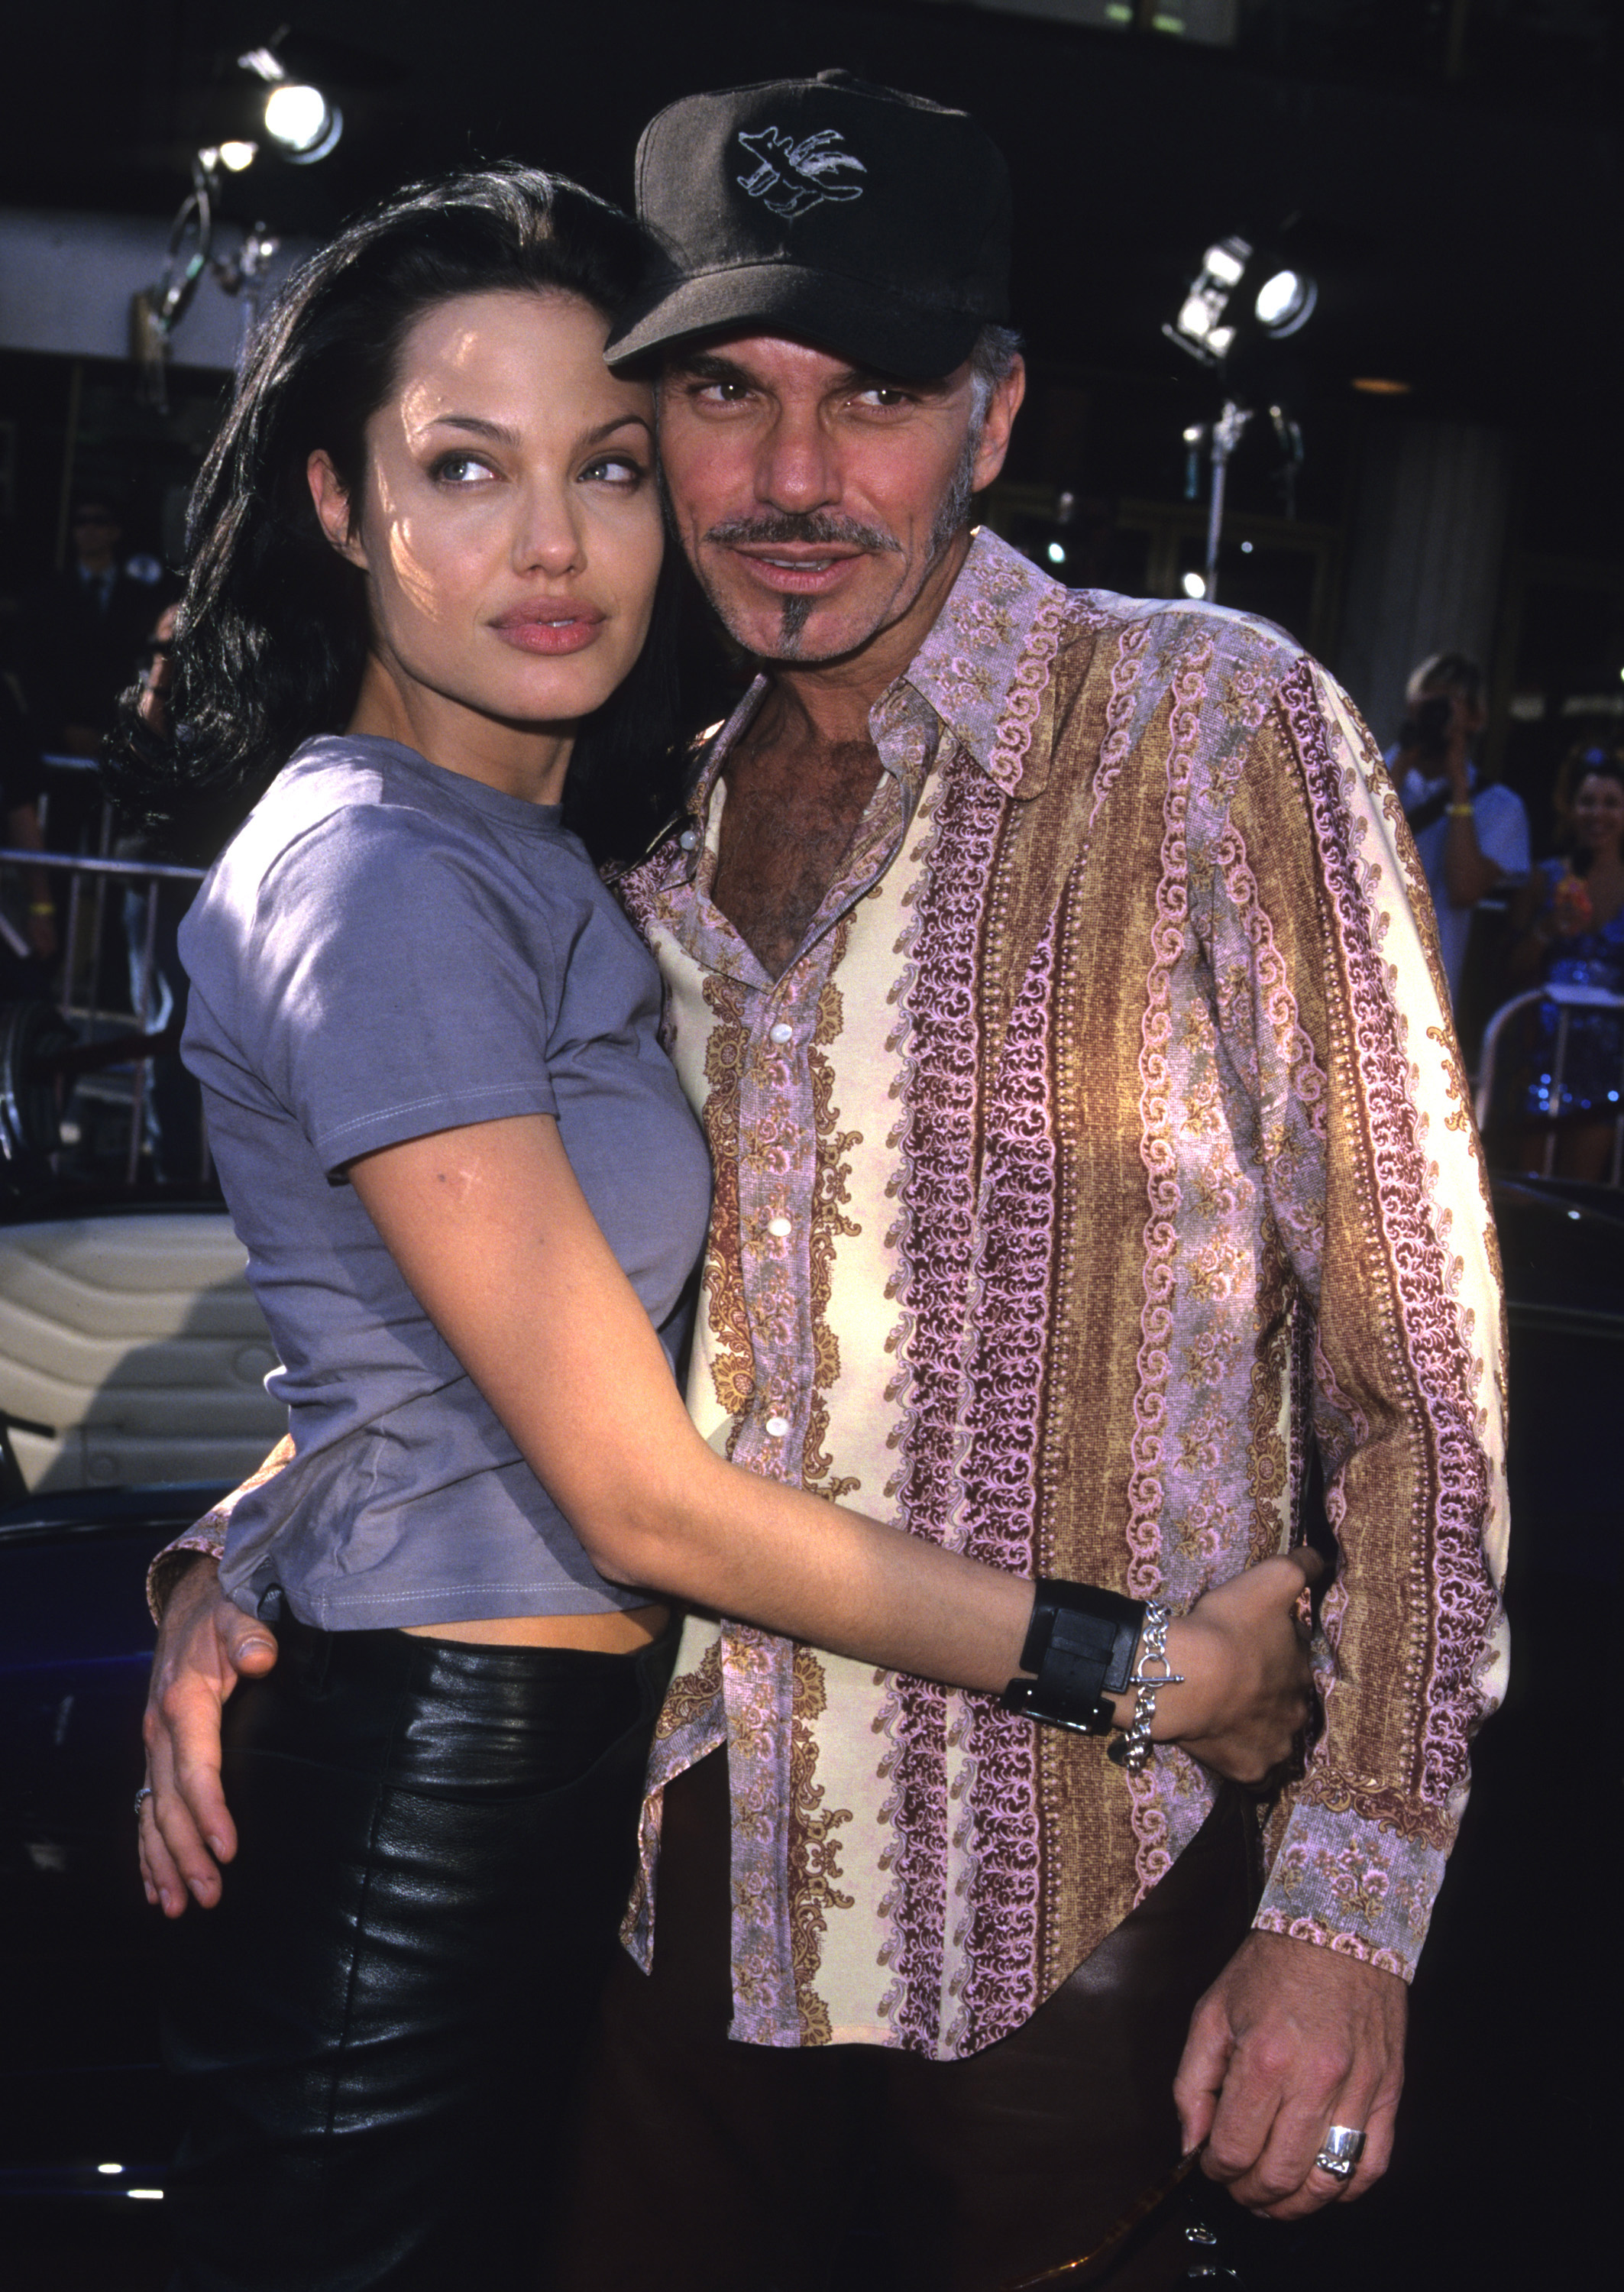 Angelina Jolie and Billy Bob Thornton during "Gone in 60 Seconds" premiere at National Theater in Westwood, California on June 5, 2000. | Source: Getty Images